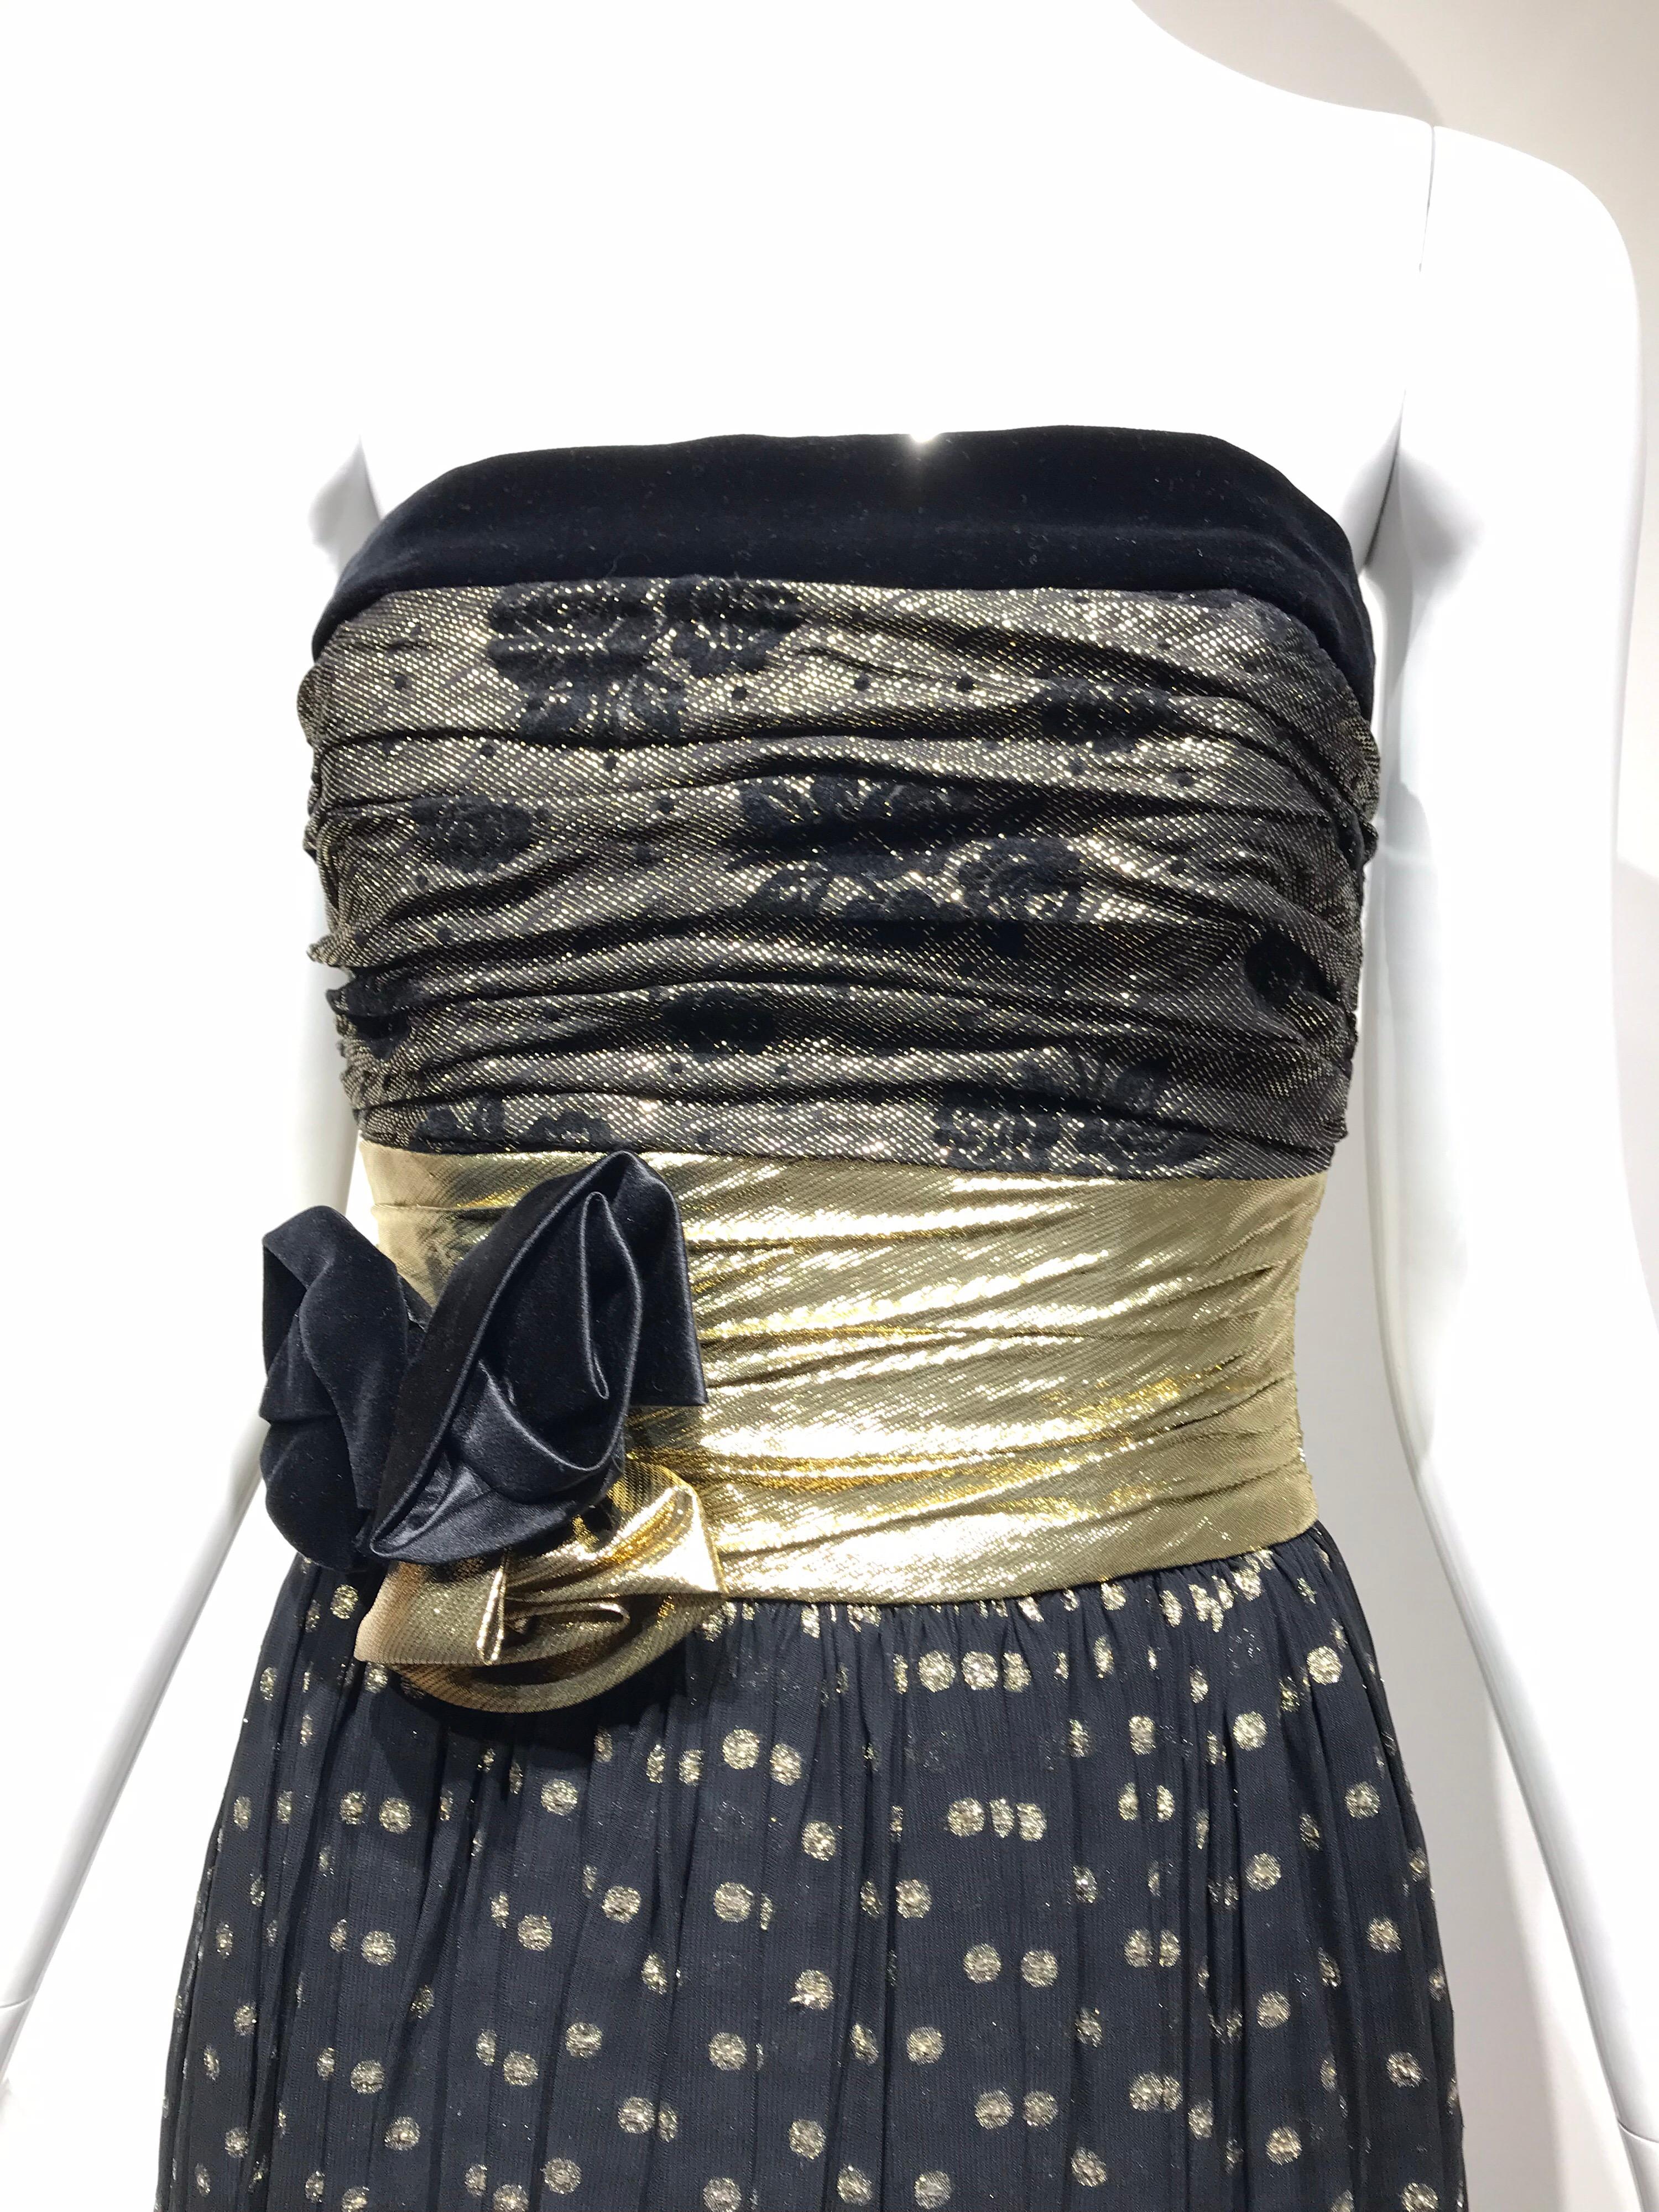 80s Escada Black and Gold strapless polkadot silk lame cocktail party dress. 3 flowers pin can be removed on the waist area. 
XS
Measurement: Bust: 31 inches/. Waist: 25 inches/ dress length: 45.5 inches